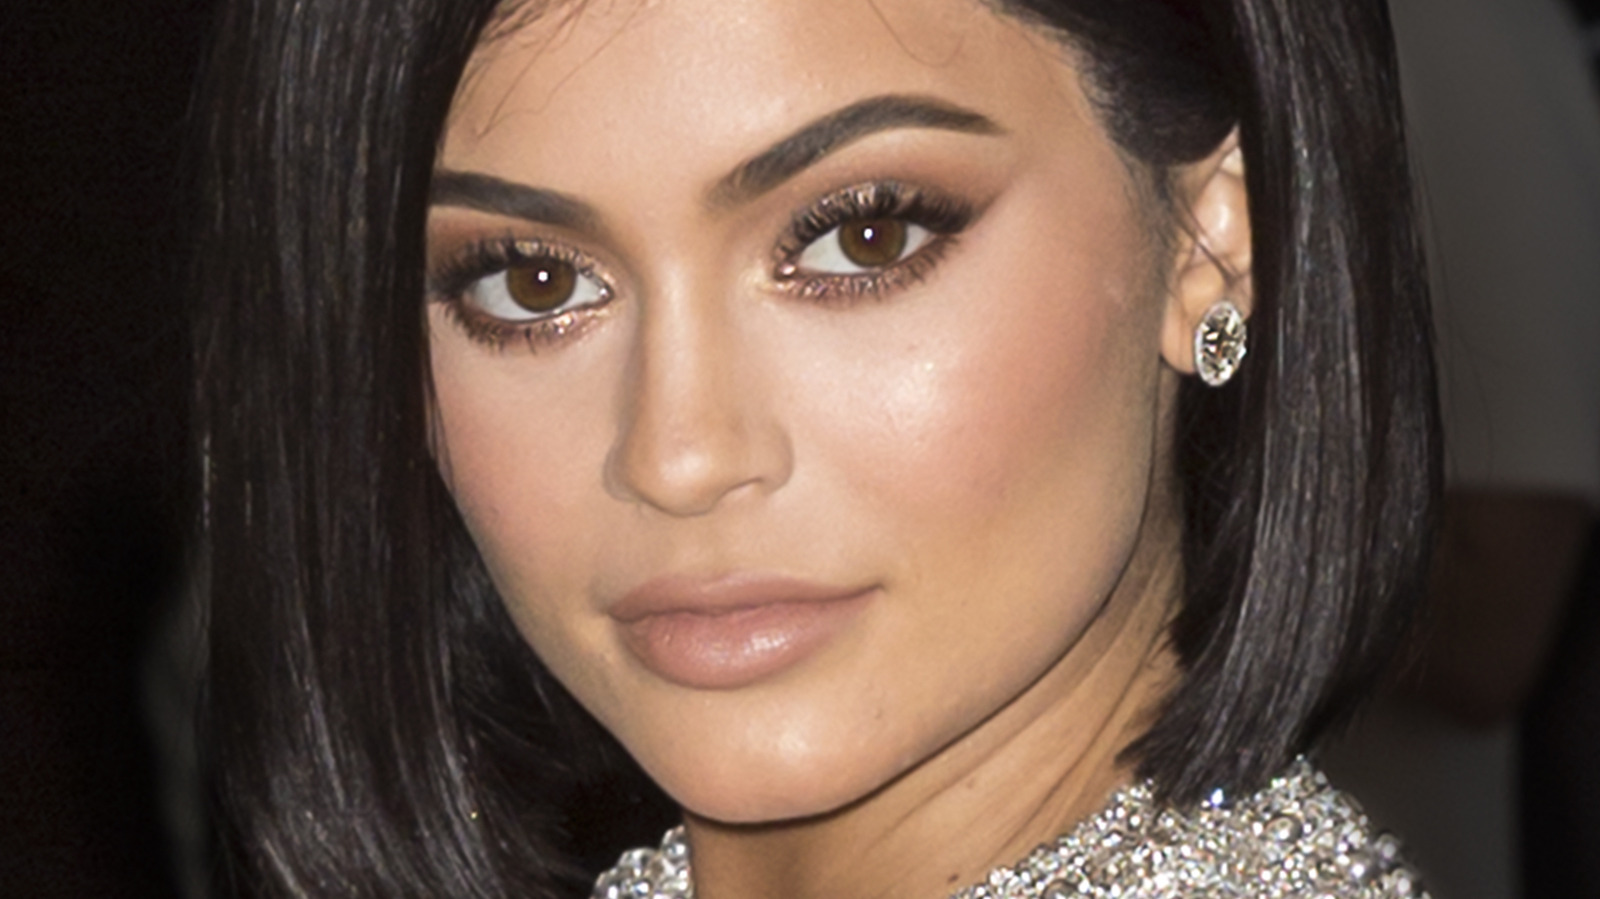 Kylie Jenner Reveals The Postpartum Issues She’s Still Struggling With